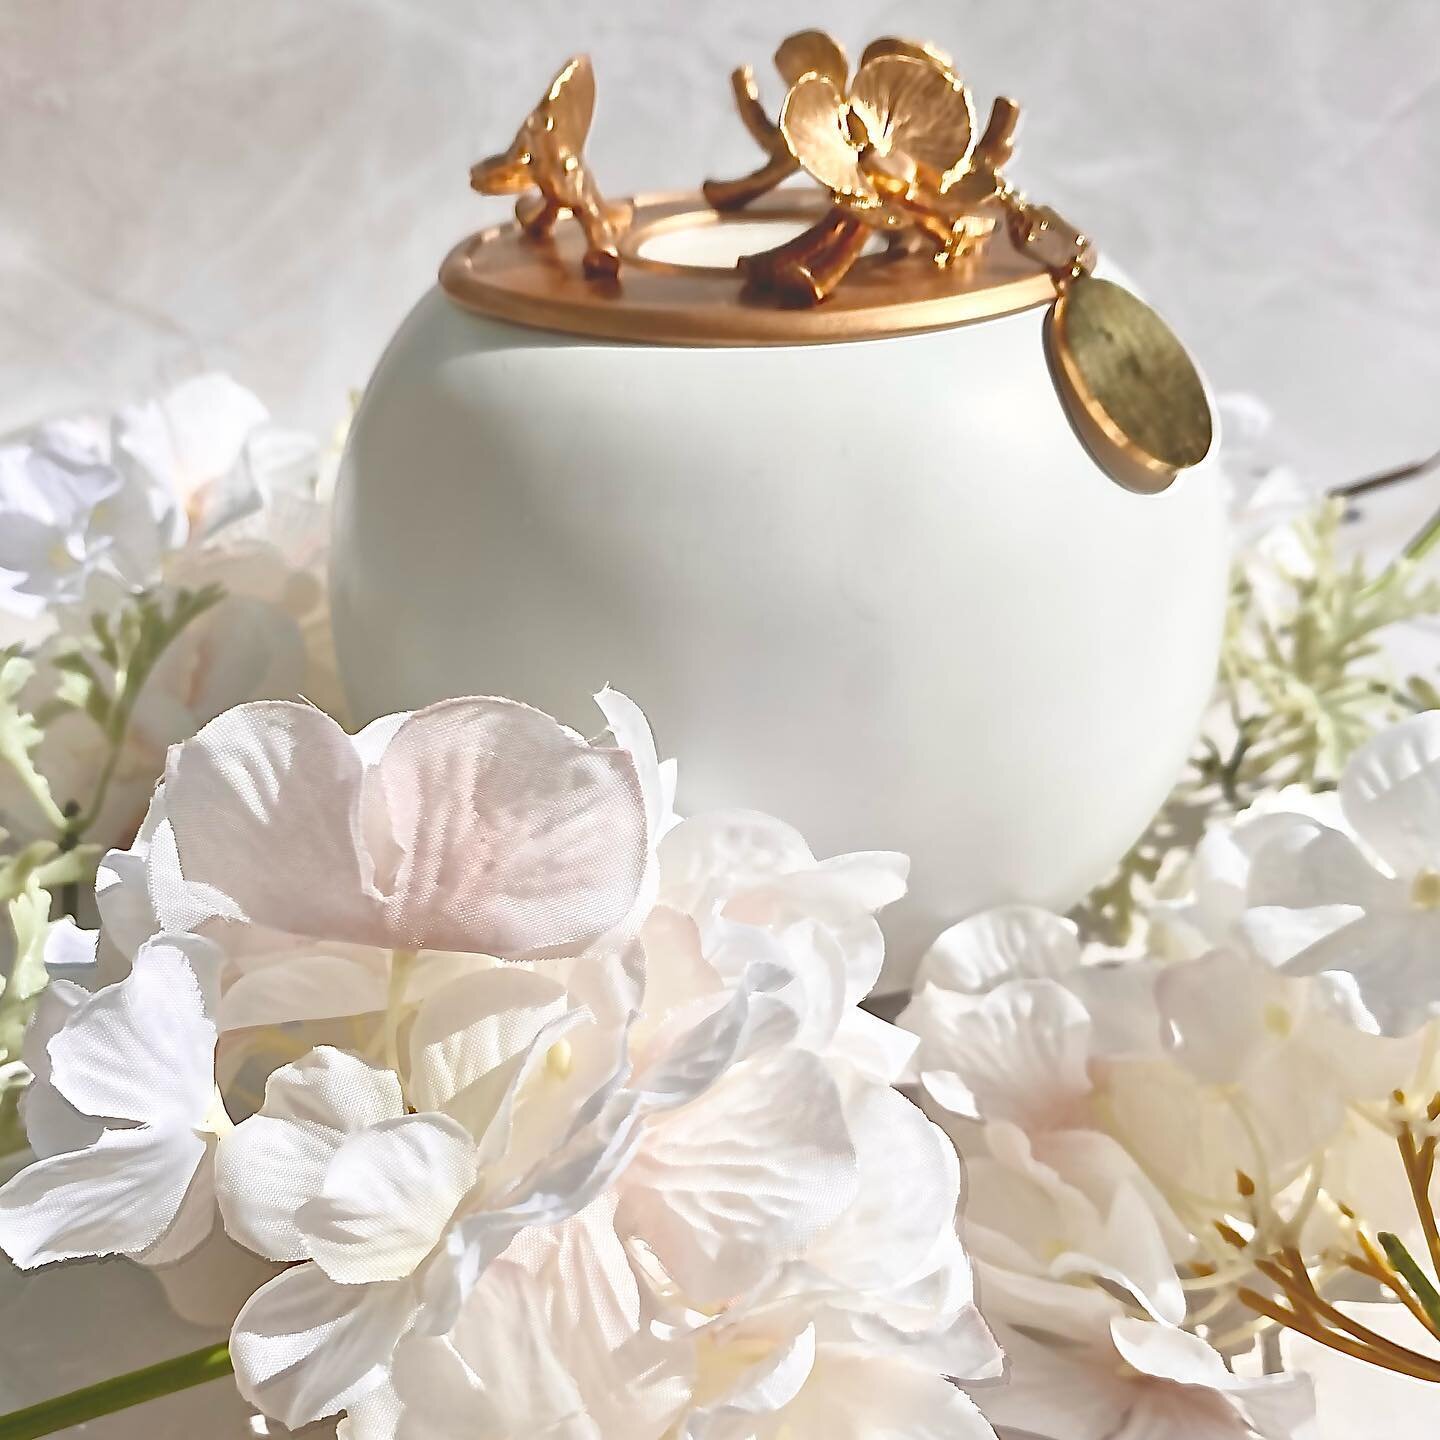 Spring Flowers &mdash; a refreshing design inspiration behind GNight Fetcher Urns🌼

Our elegant urns are handcrafted with love and inspired by the comforting colors and shapes of spring flowers. Each piece captures the essence of nature's wonders, b